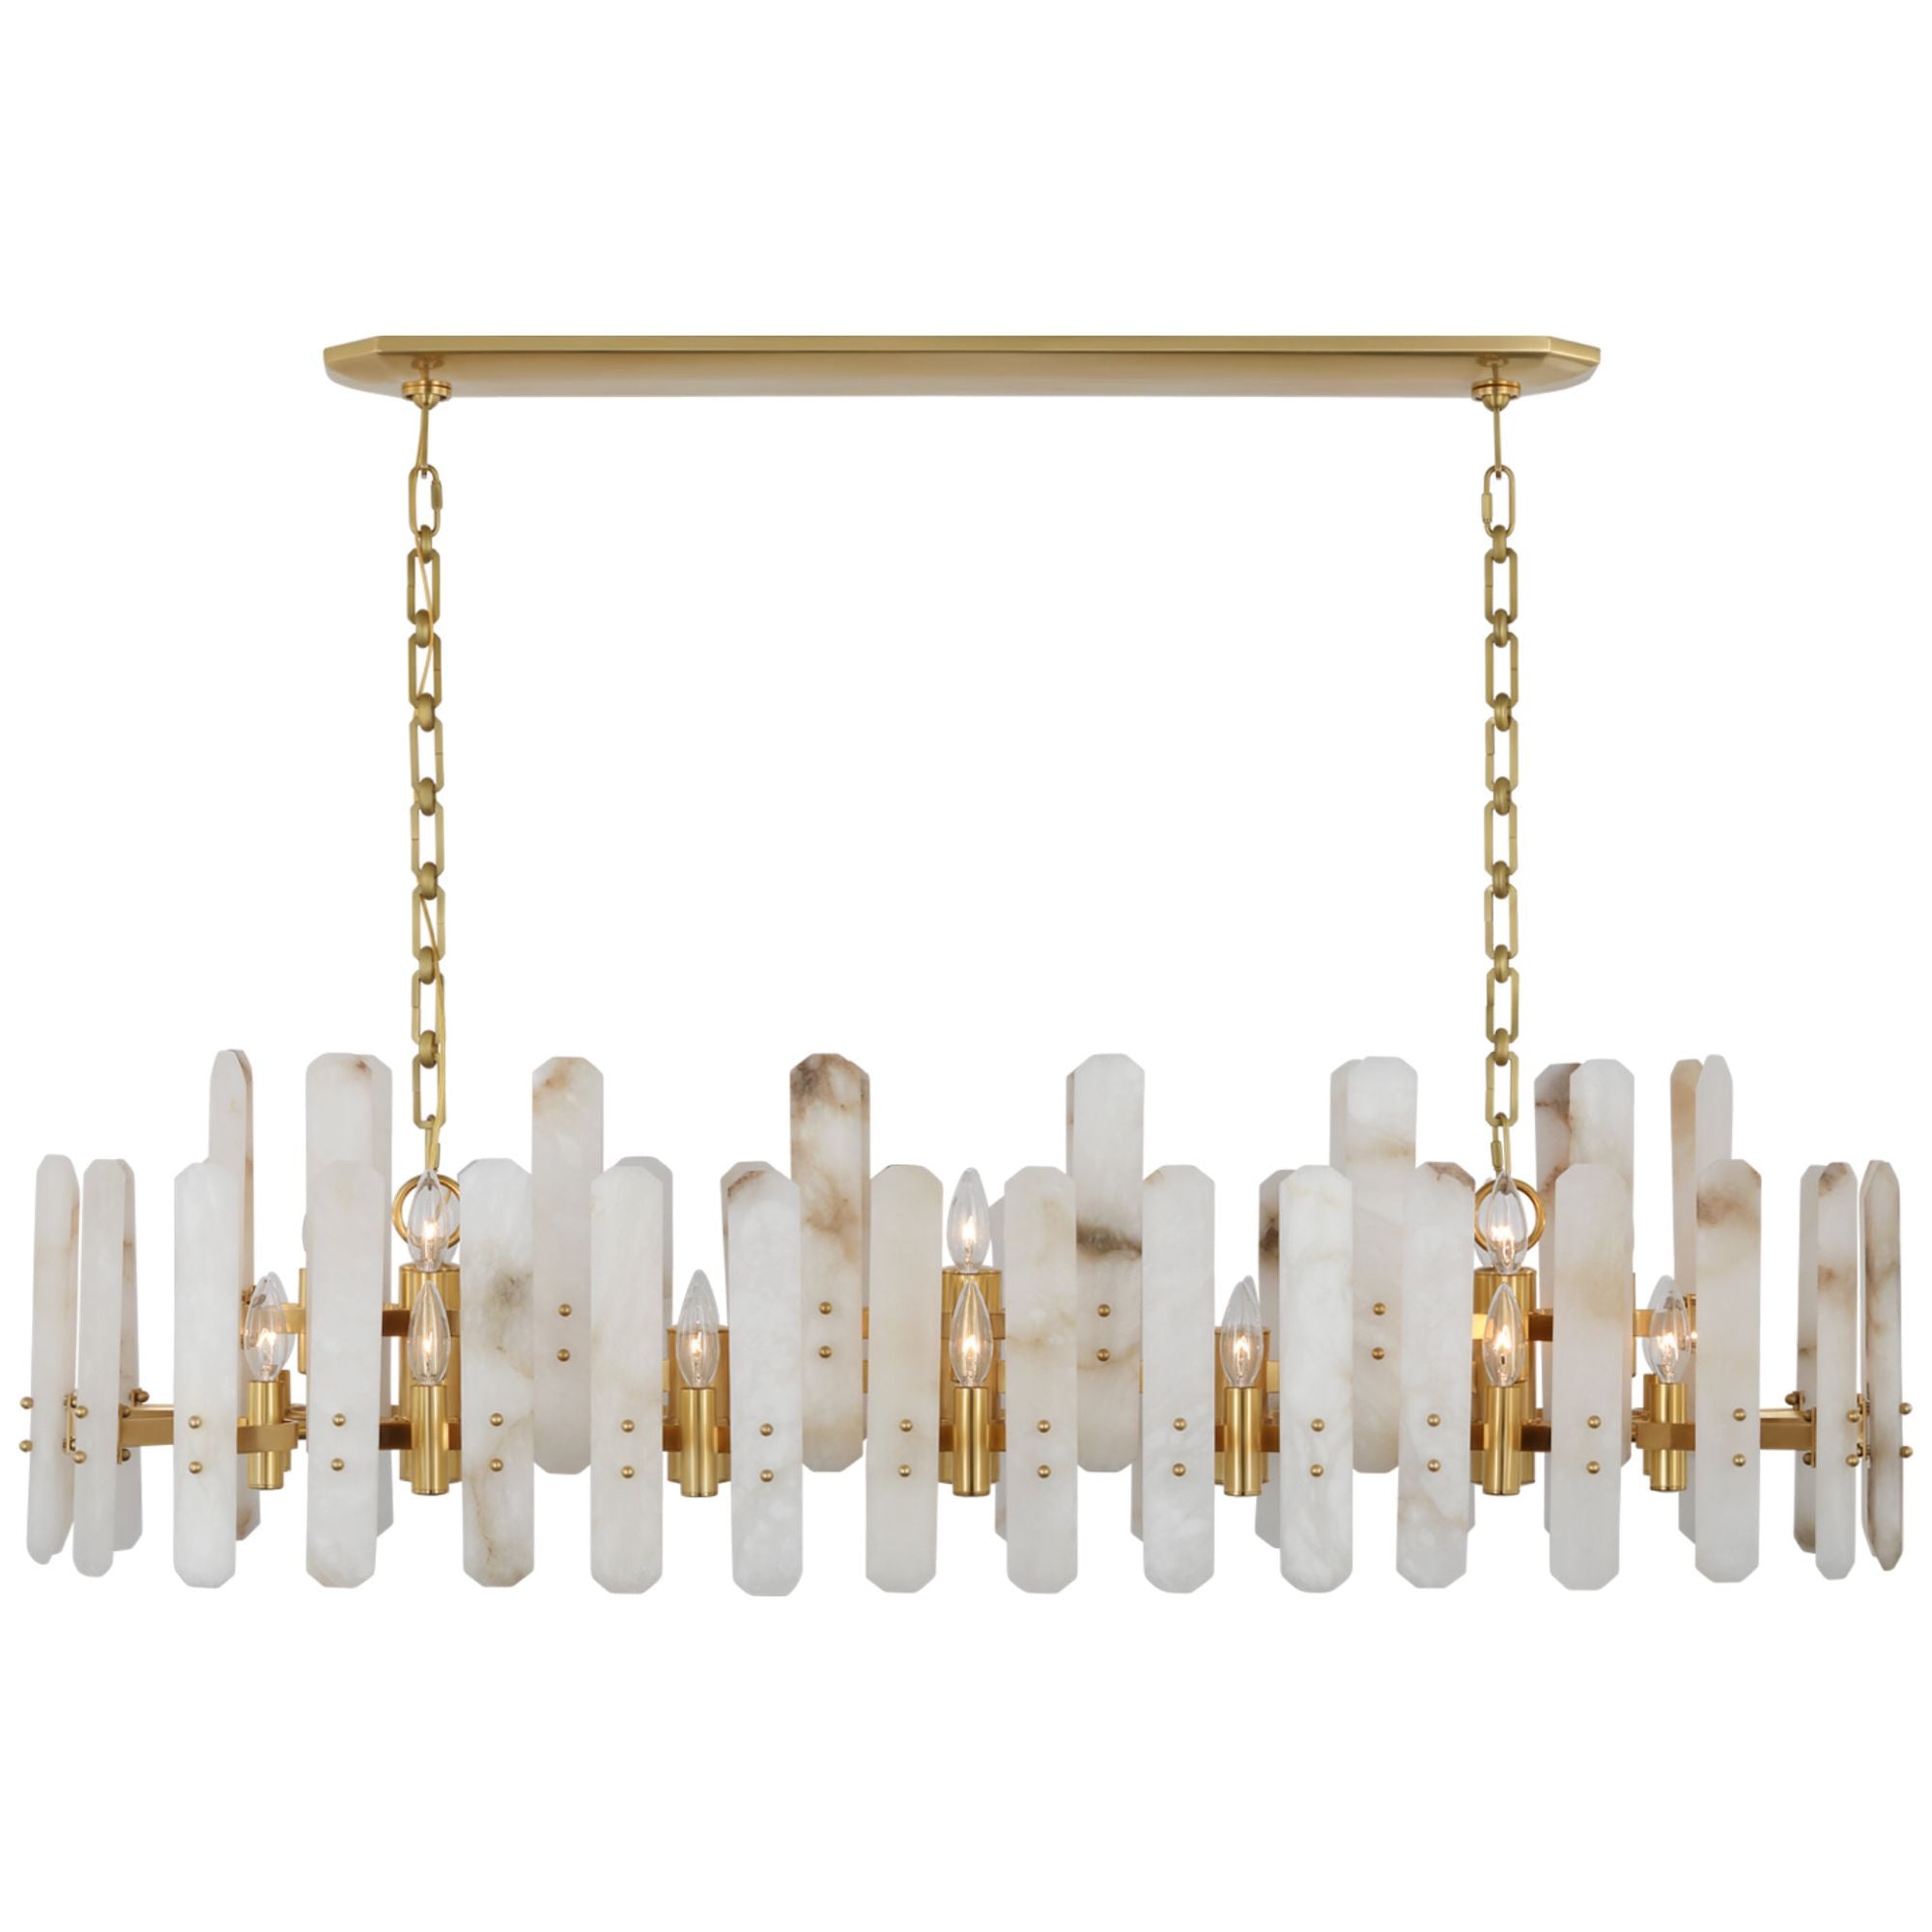 AERIN Bonnington Large Linear Chandelier in Hand-Rubbed Antique Brass with Alabaster